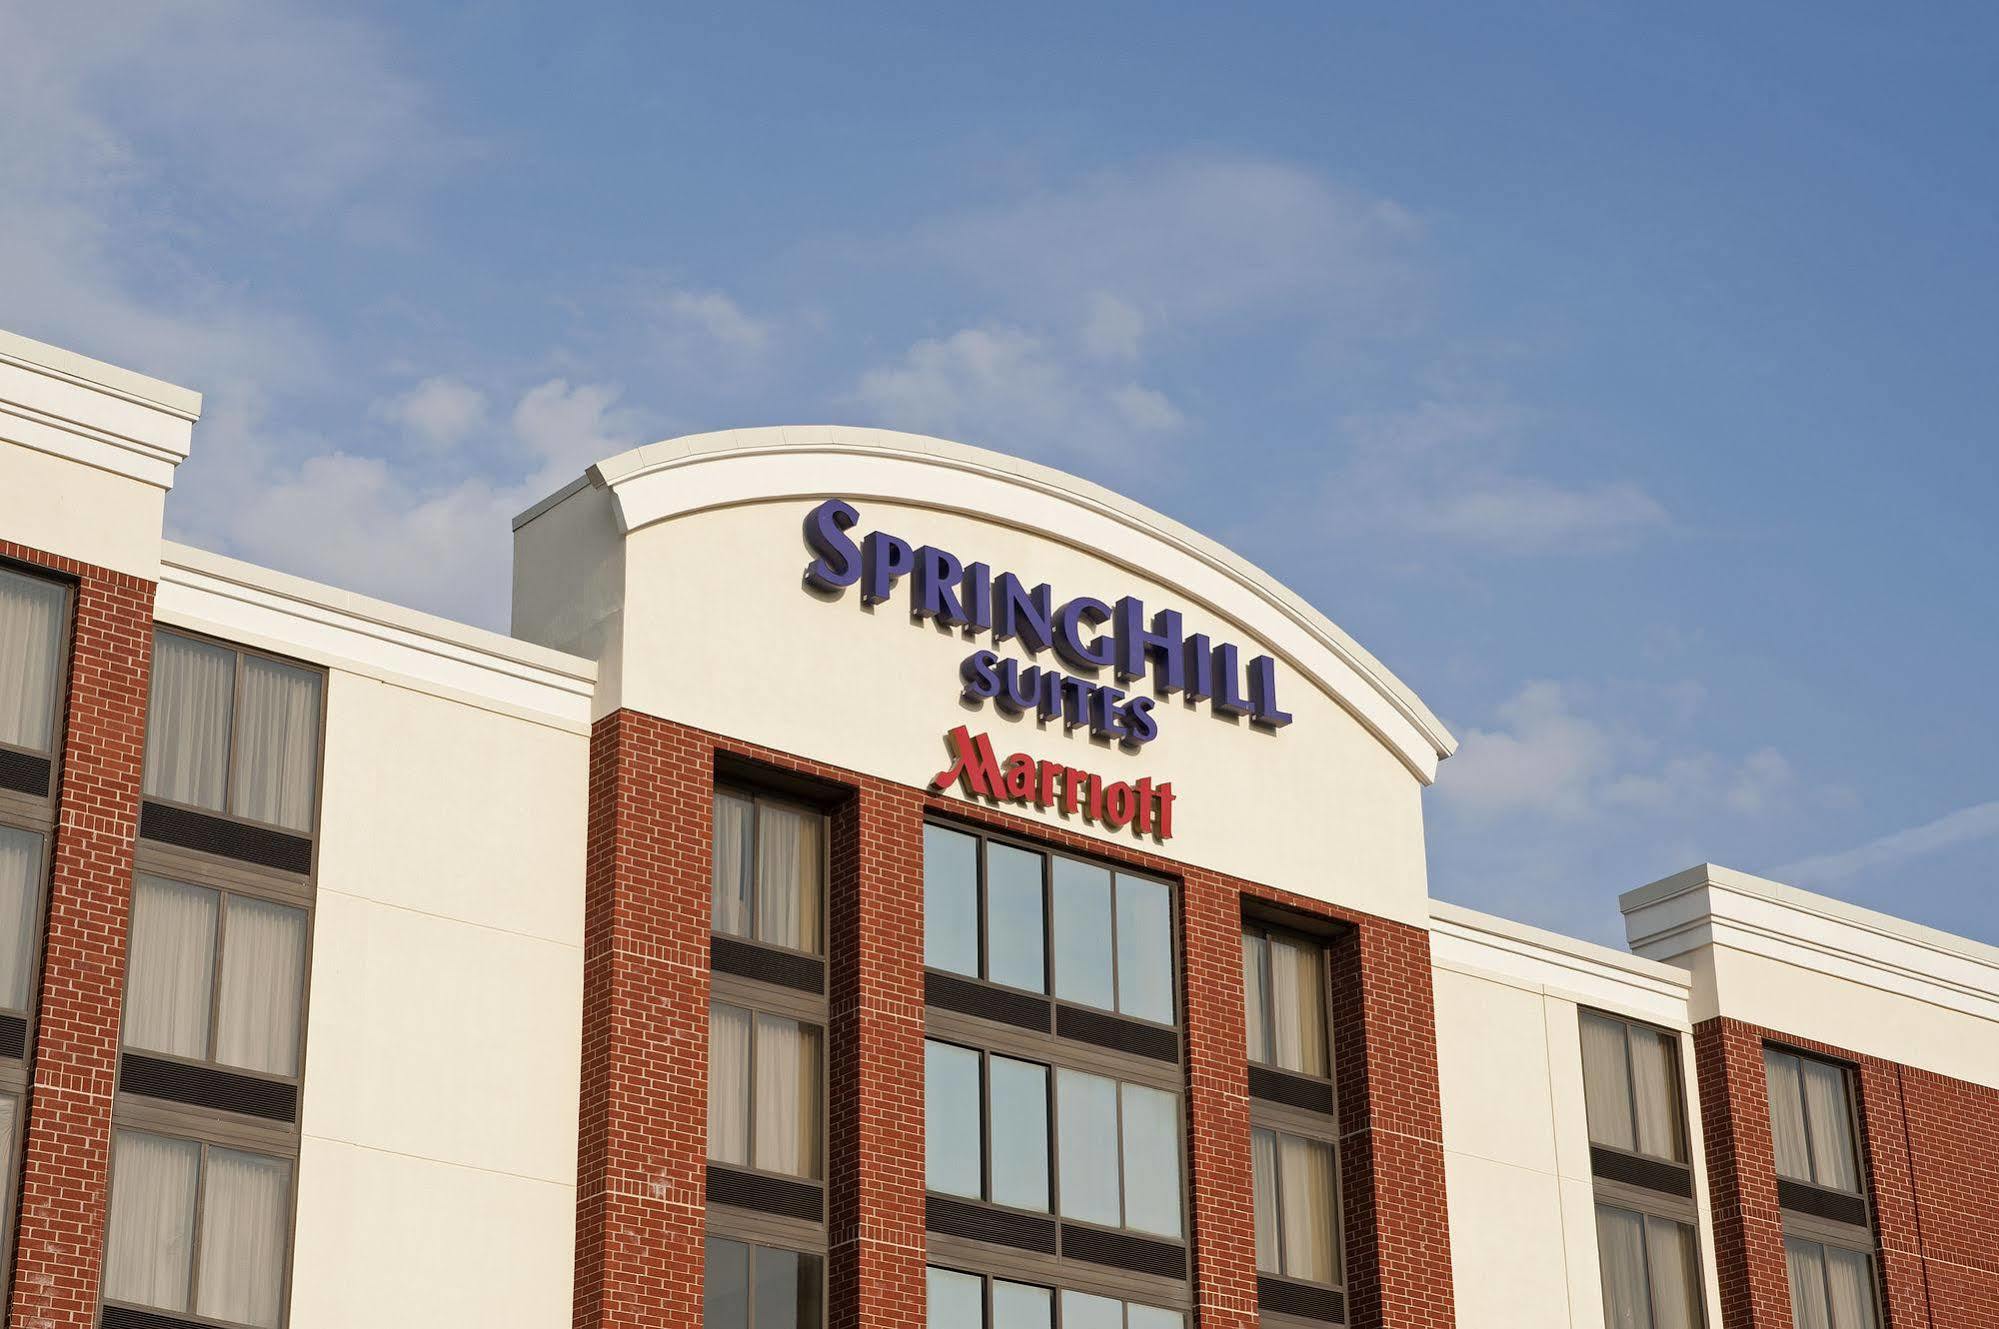 Springhill Suites By Marriott Chicago Naperville Warrenville Exterior photo